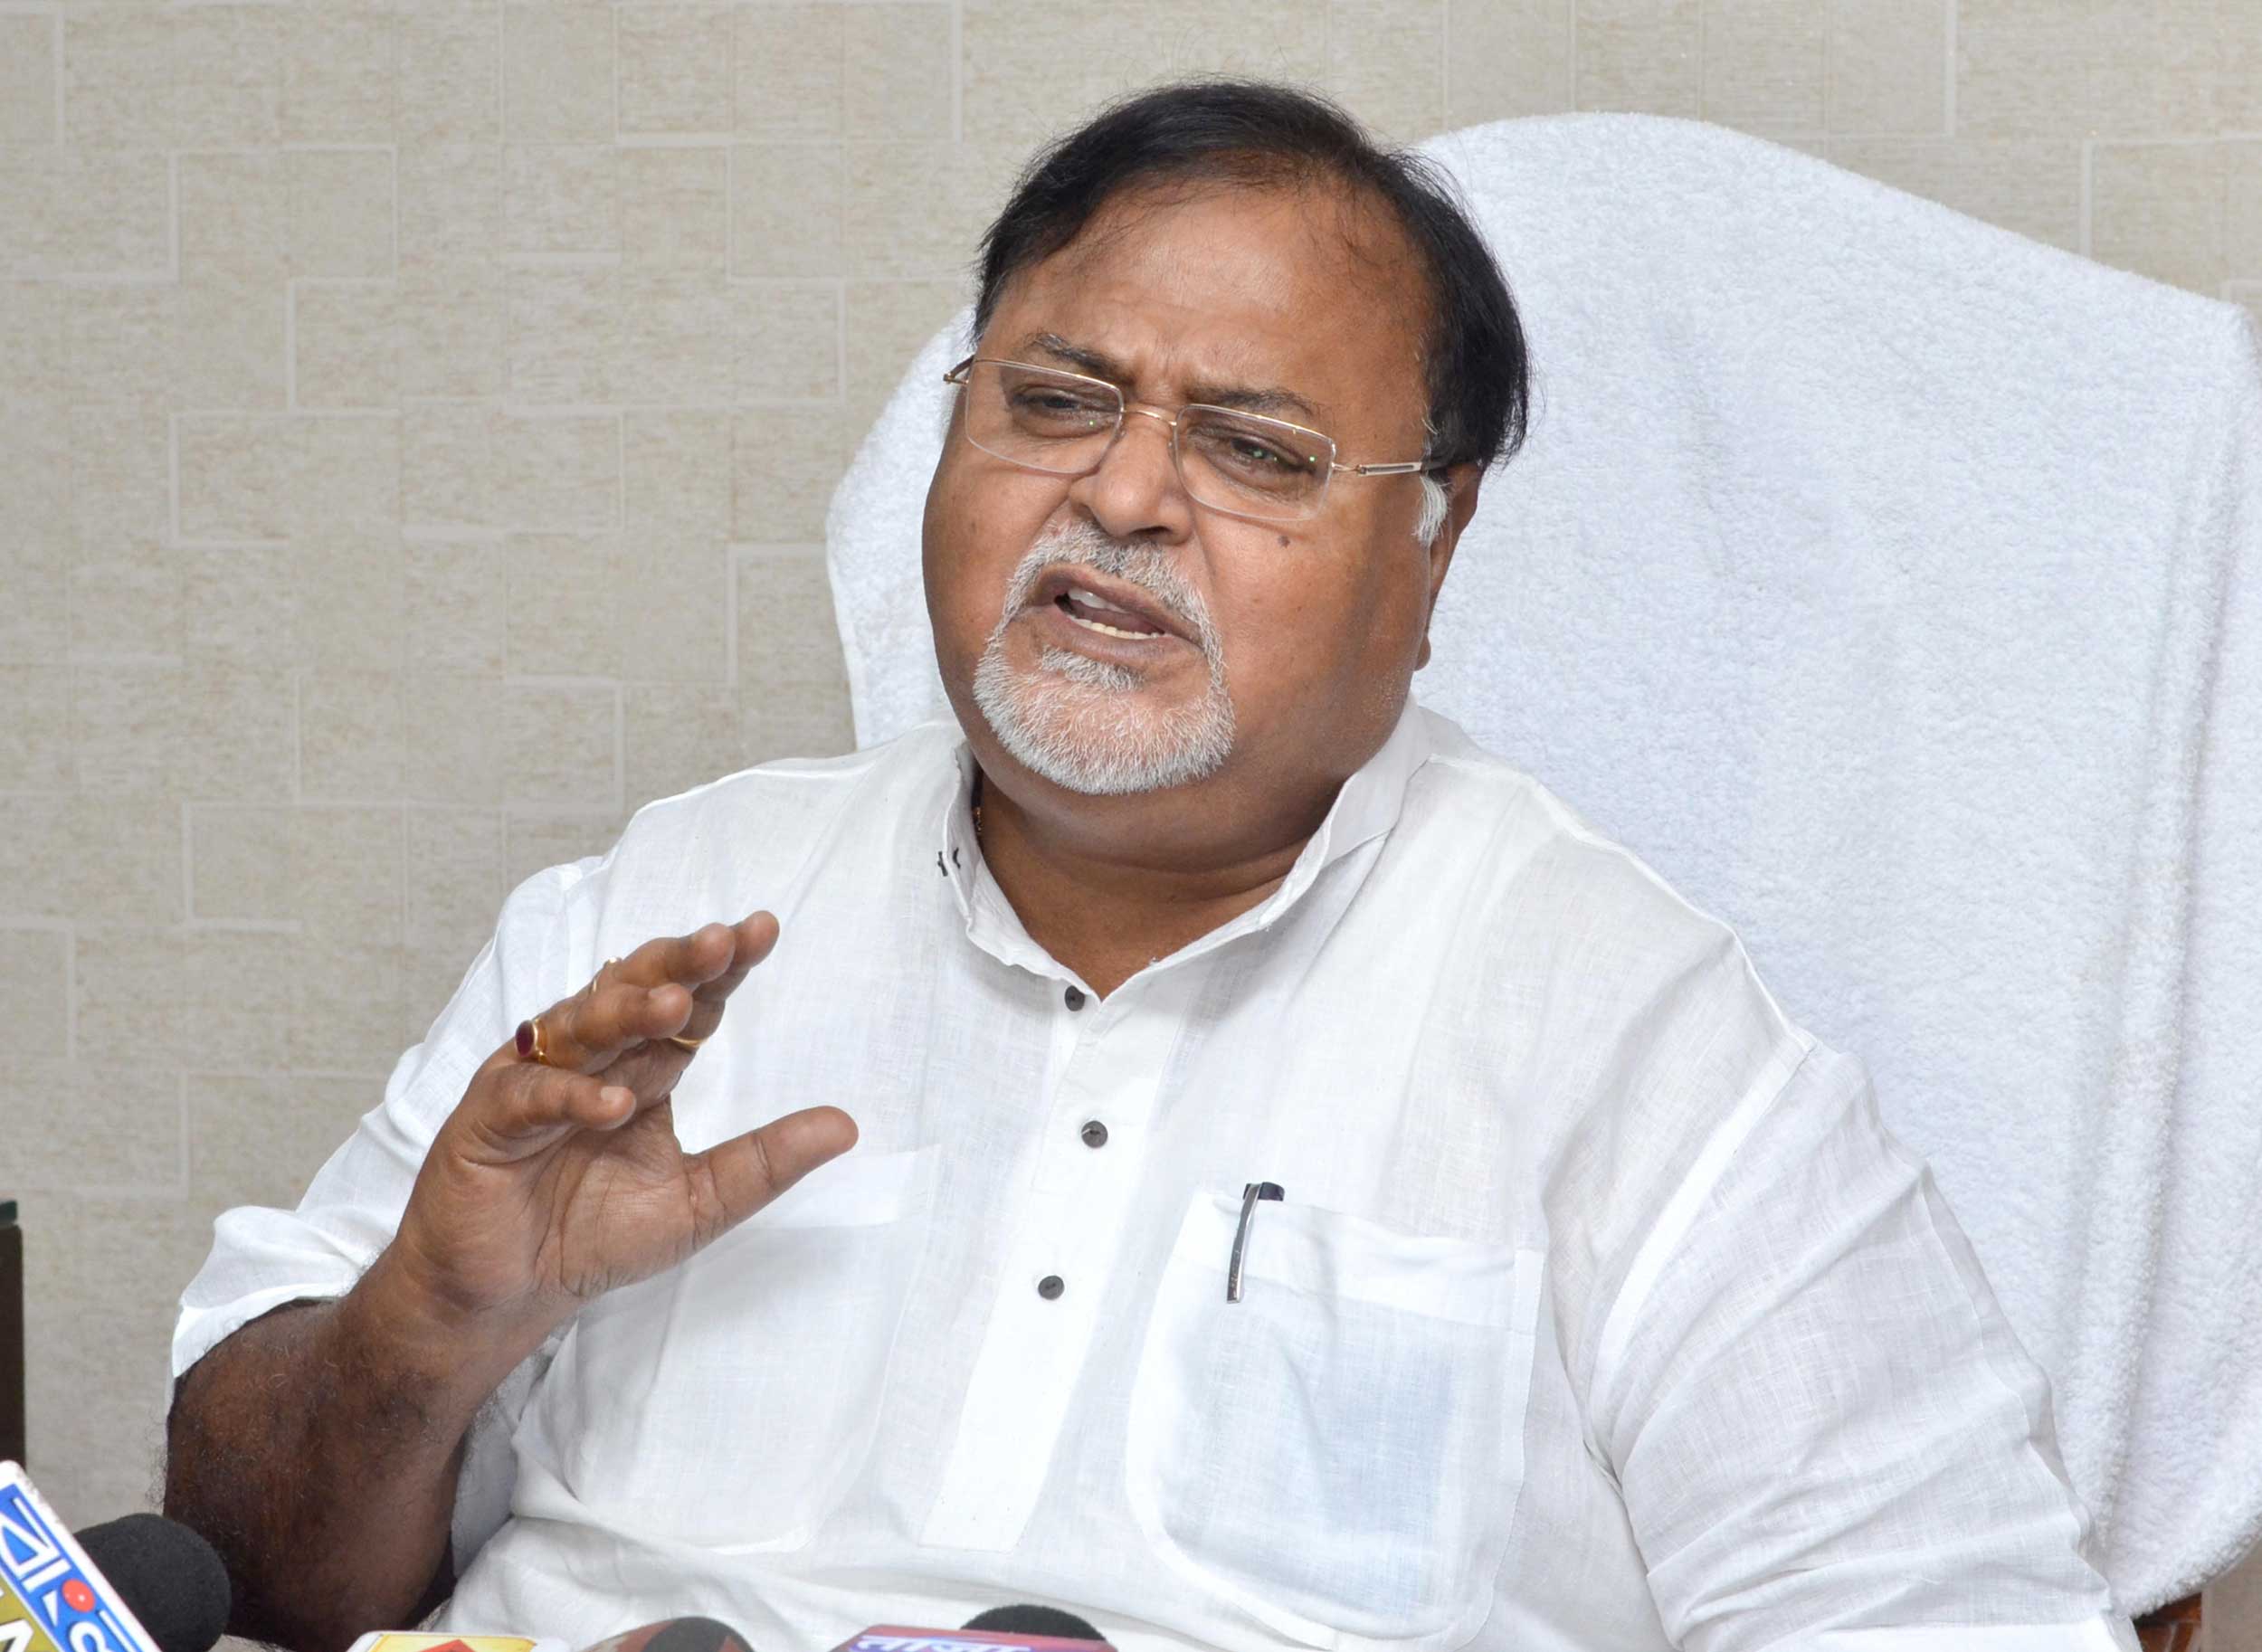 The amendment comes months after representatives of the Trinamul Congress Chhatra Parishad met education minister Partha Chatterjee (in picture) and demanded that a post be created so that one of the class representatives could share the responsibility along with the treasurer.